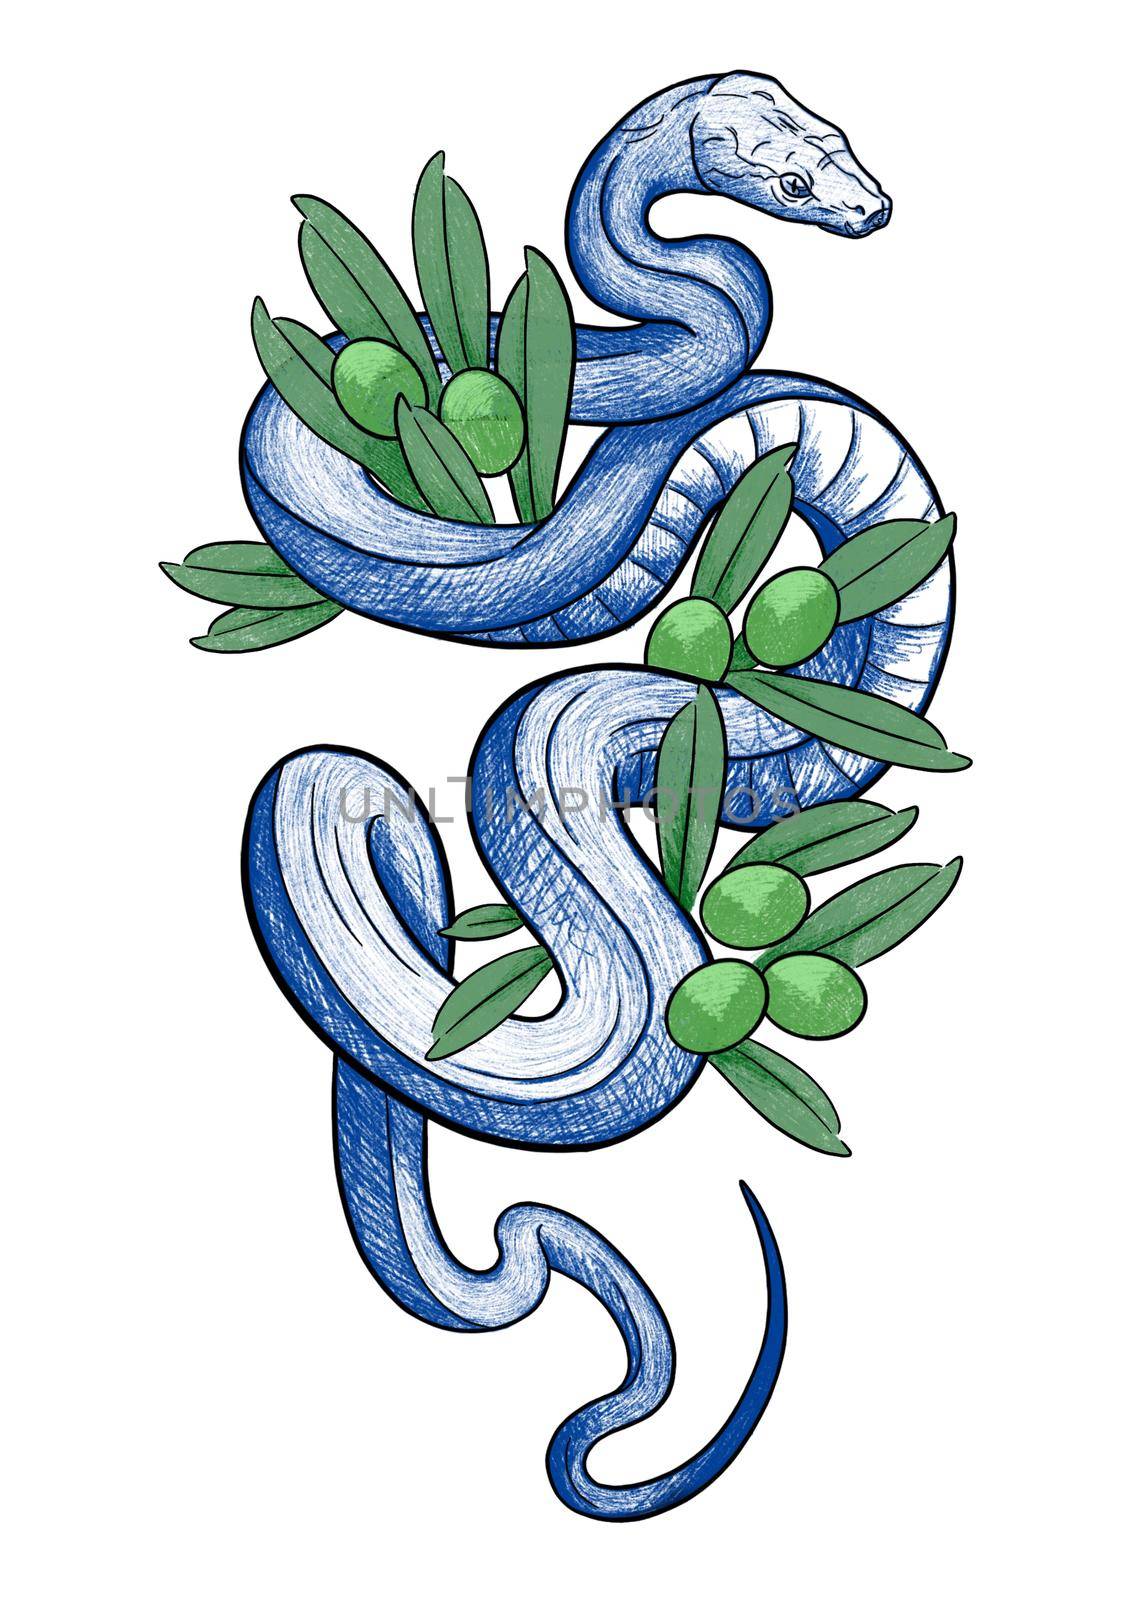 sketch of a wriggling snake with the addition of olives art